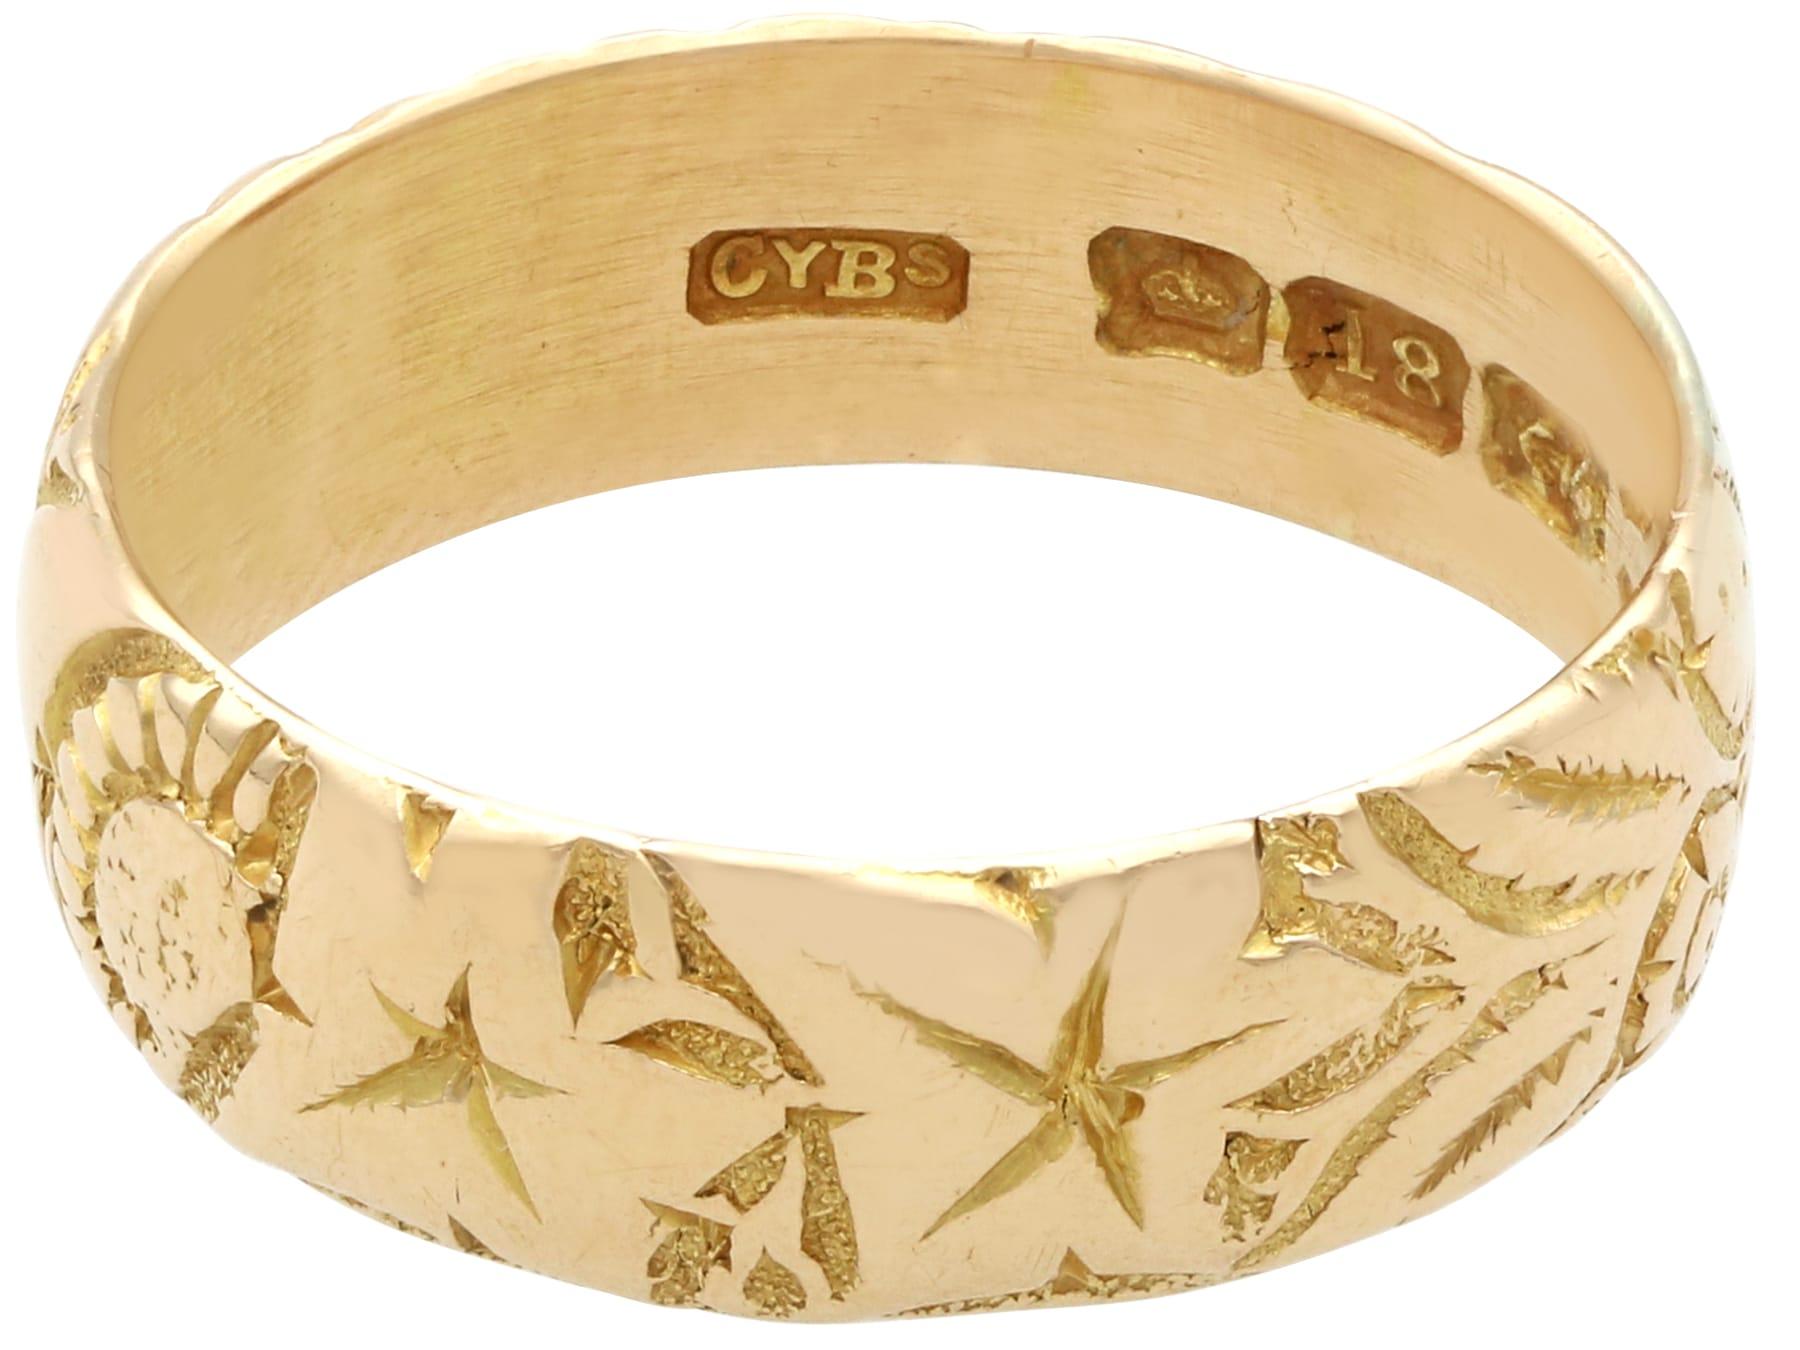 Antique 18k Yellow Gold Wedding Band Circa 1880 In Excellent Condition For Sale In Jesmond, Newcastle Upon Tyne